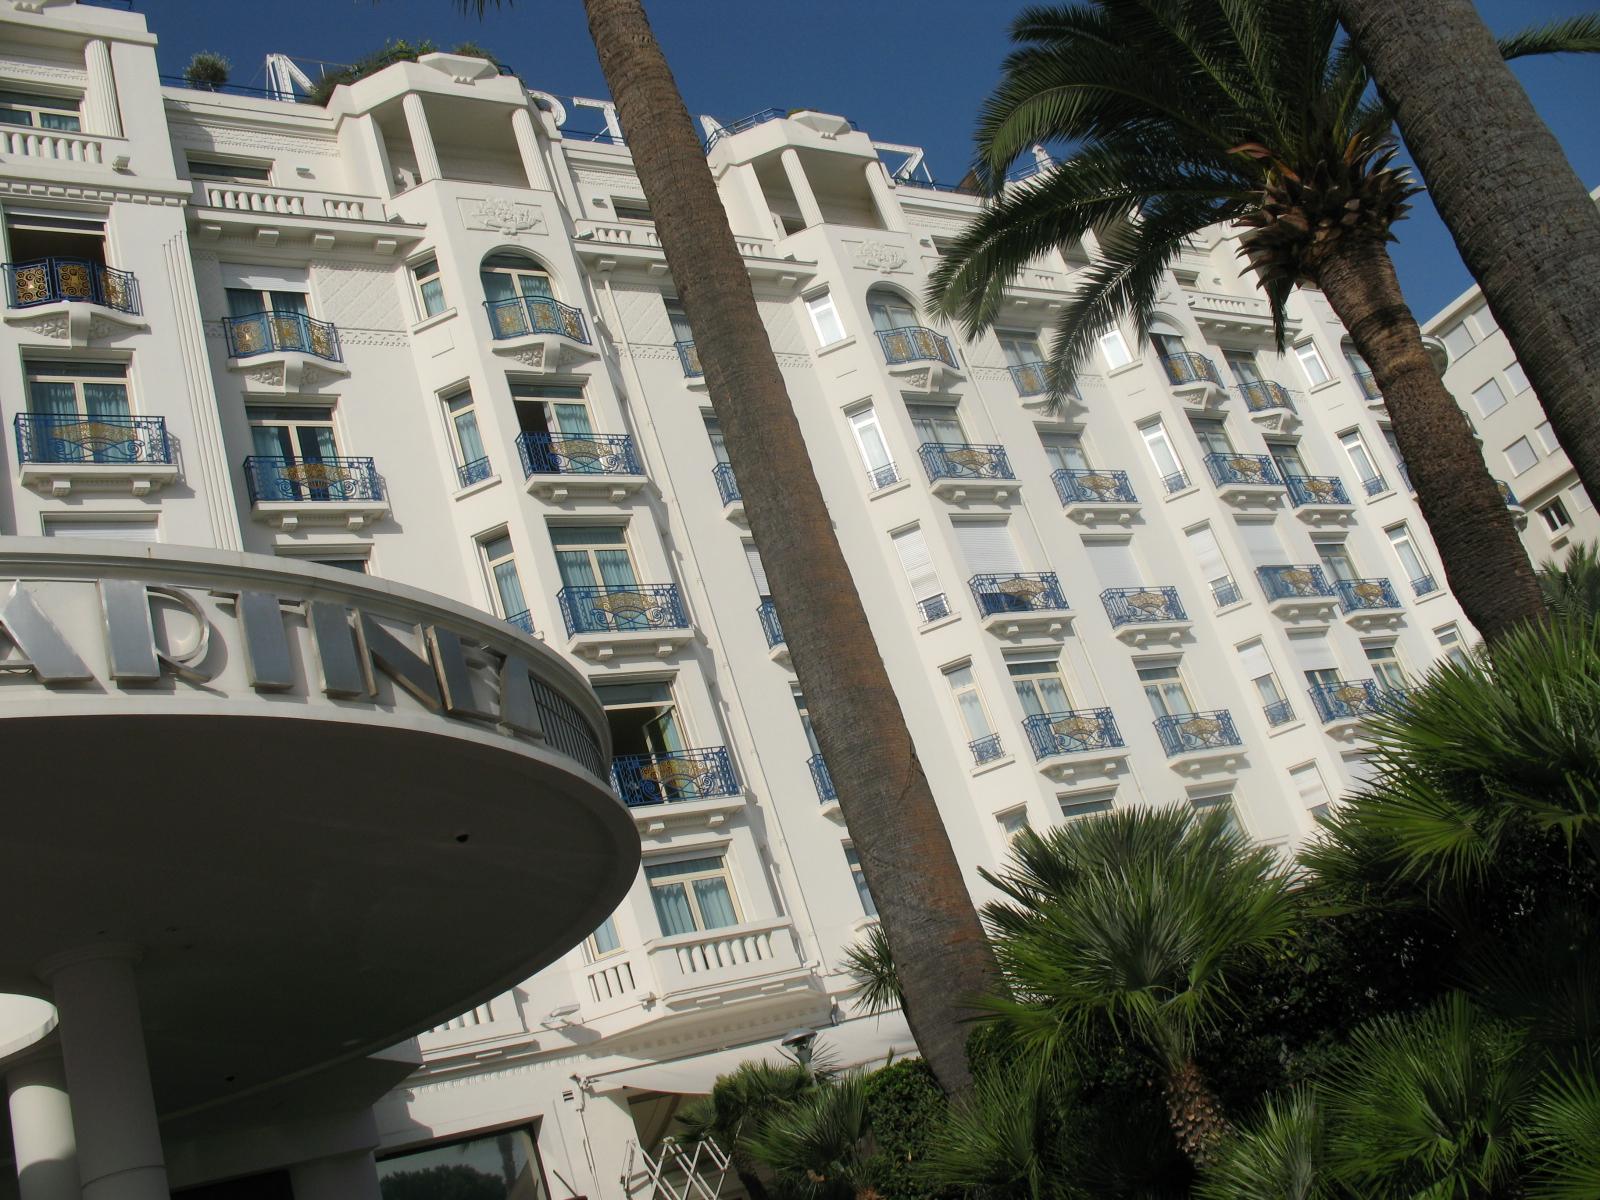 Where to stay in Cannes. The Hotel Martinez provides a luxury choice